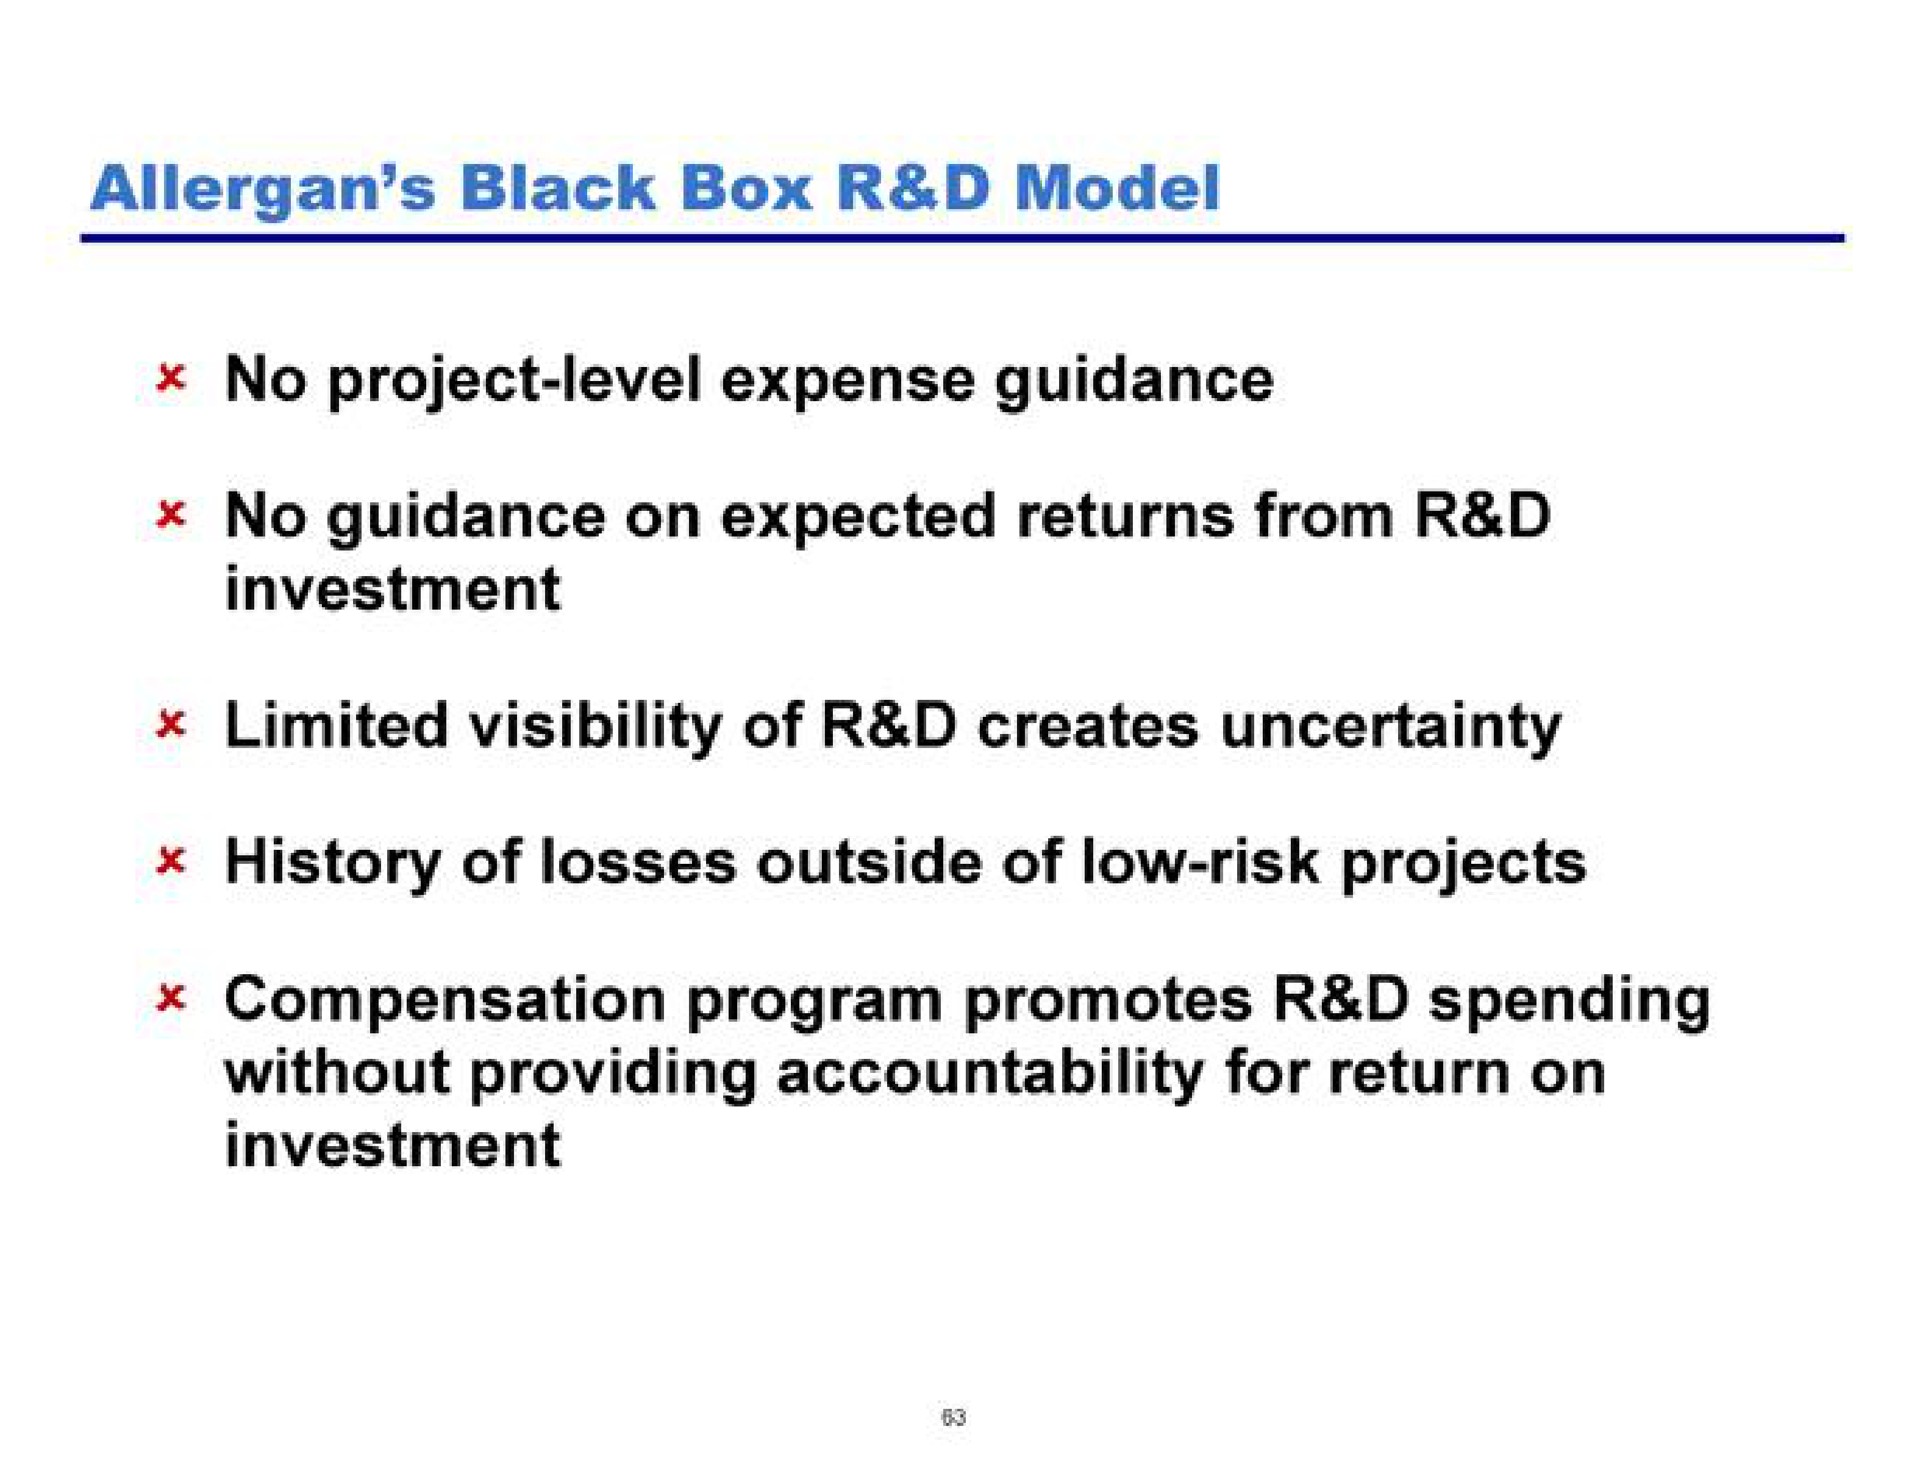 black box model no project level expense guidance no guidance on expected returns from investment limited visibility of creates uncertainty history of losses outside of low risk projects compensation program promotes spending without providing accountability for return on investment | Pershing Square